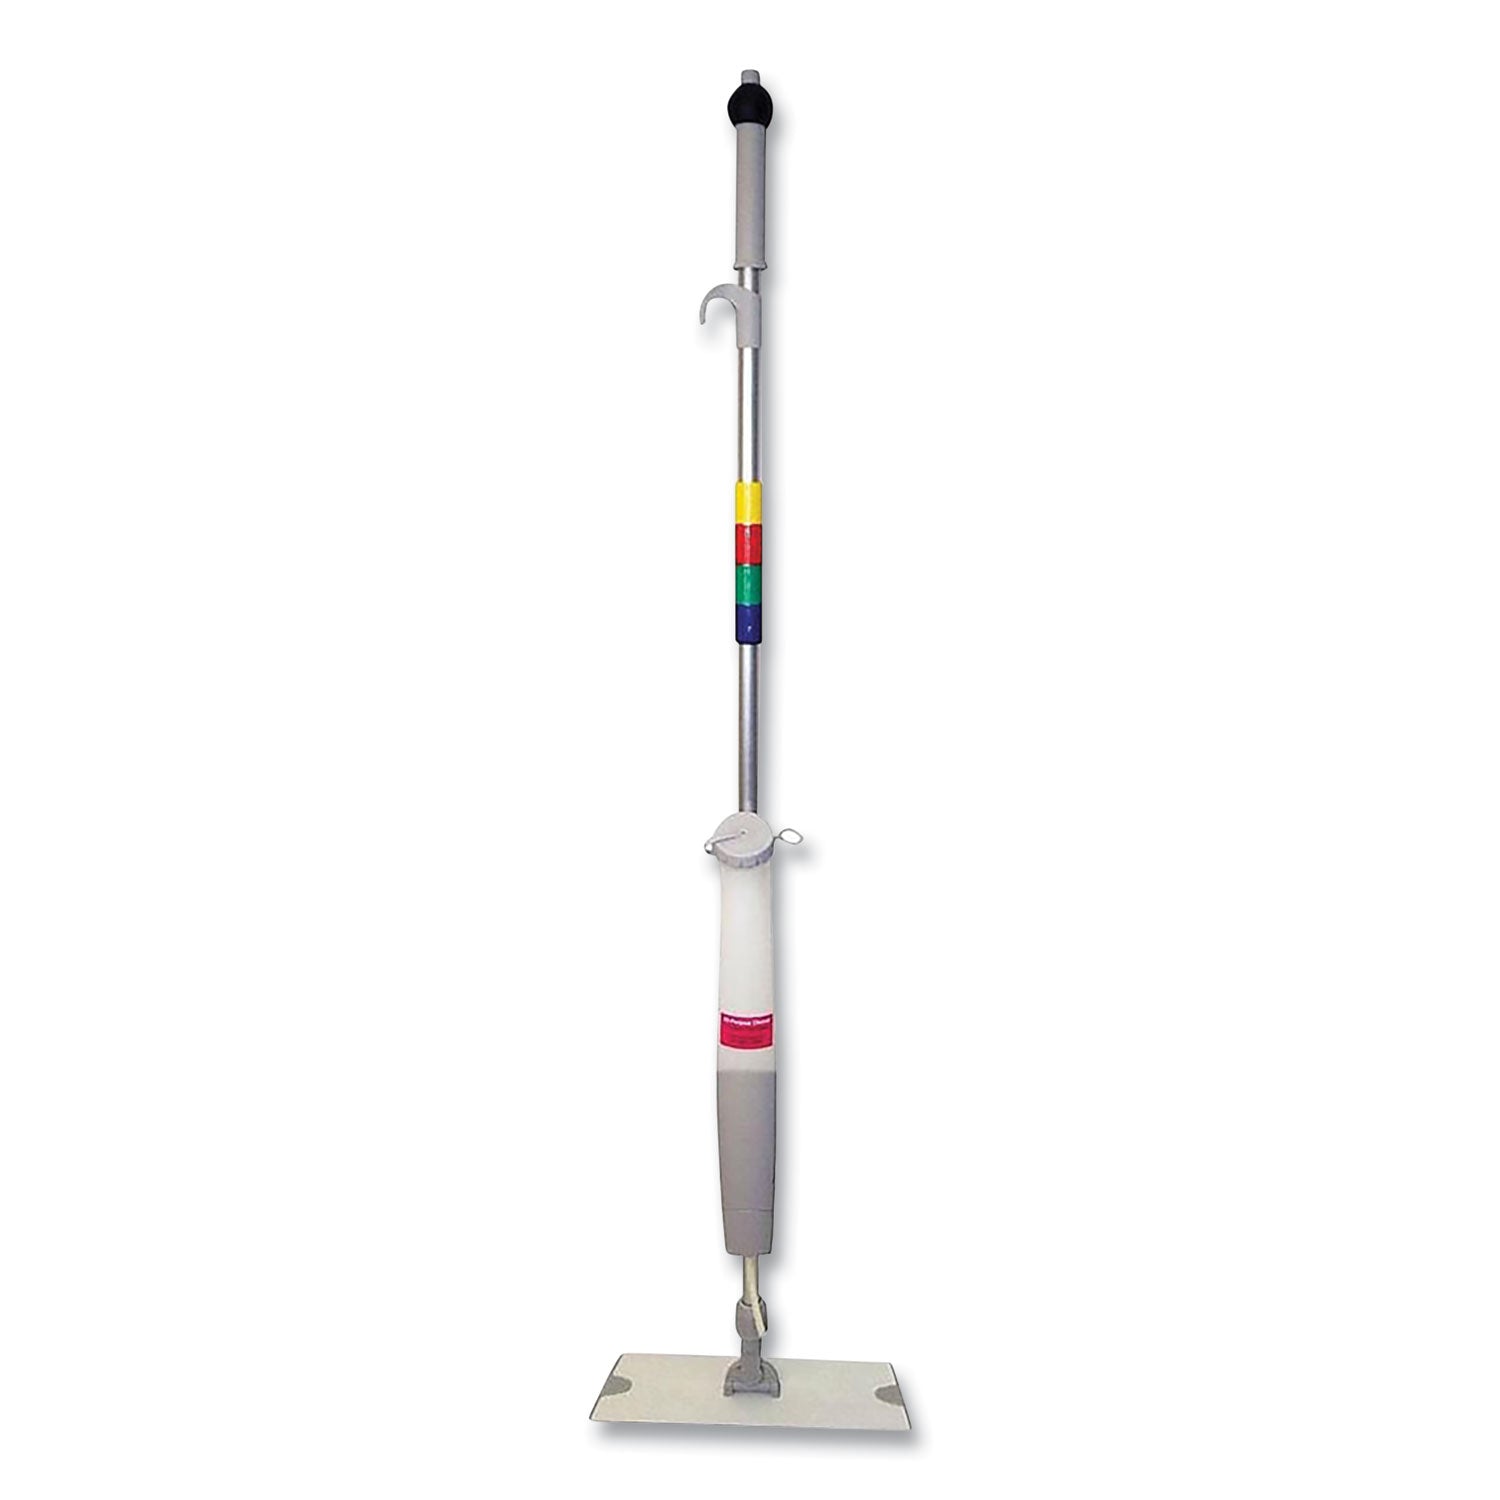 odell-advantage+-bucketless-mop-16-frame-white-silver-handle_odcbwms16 - 1